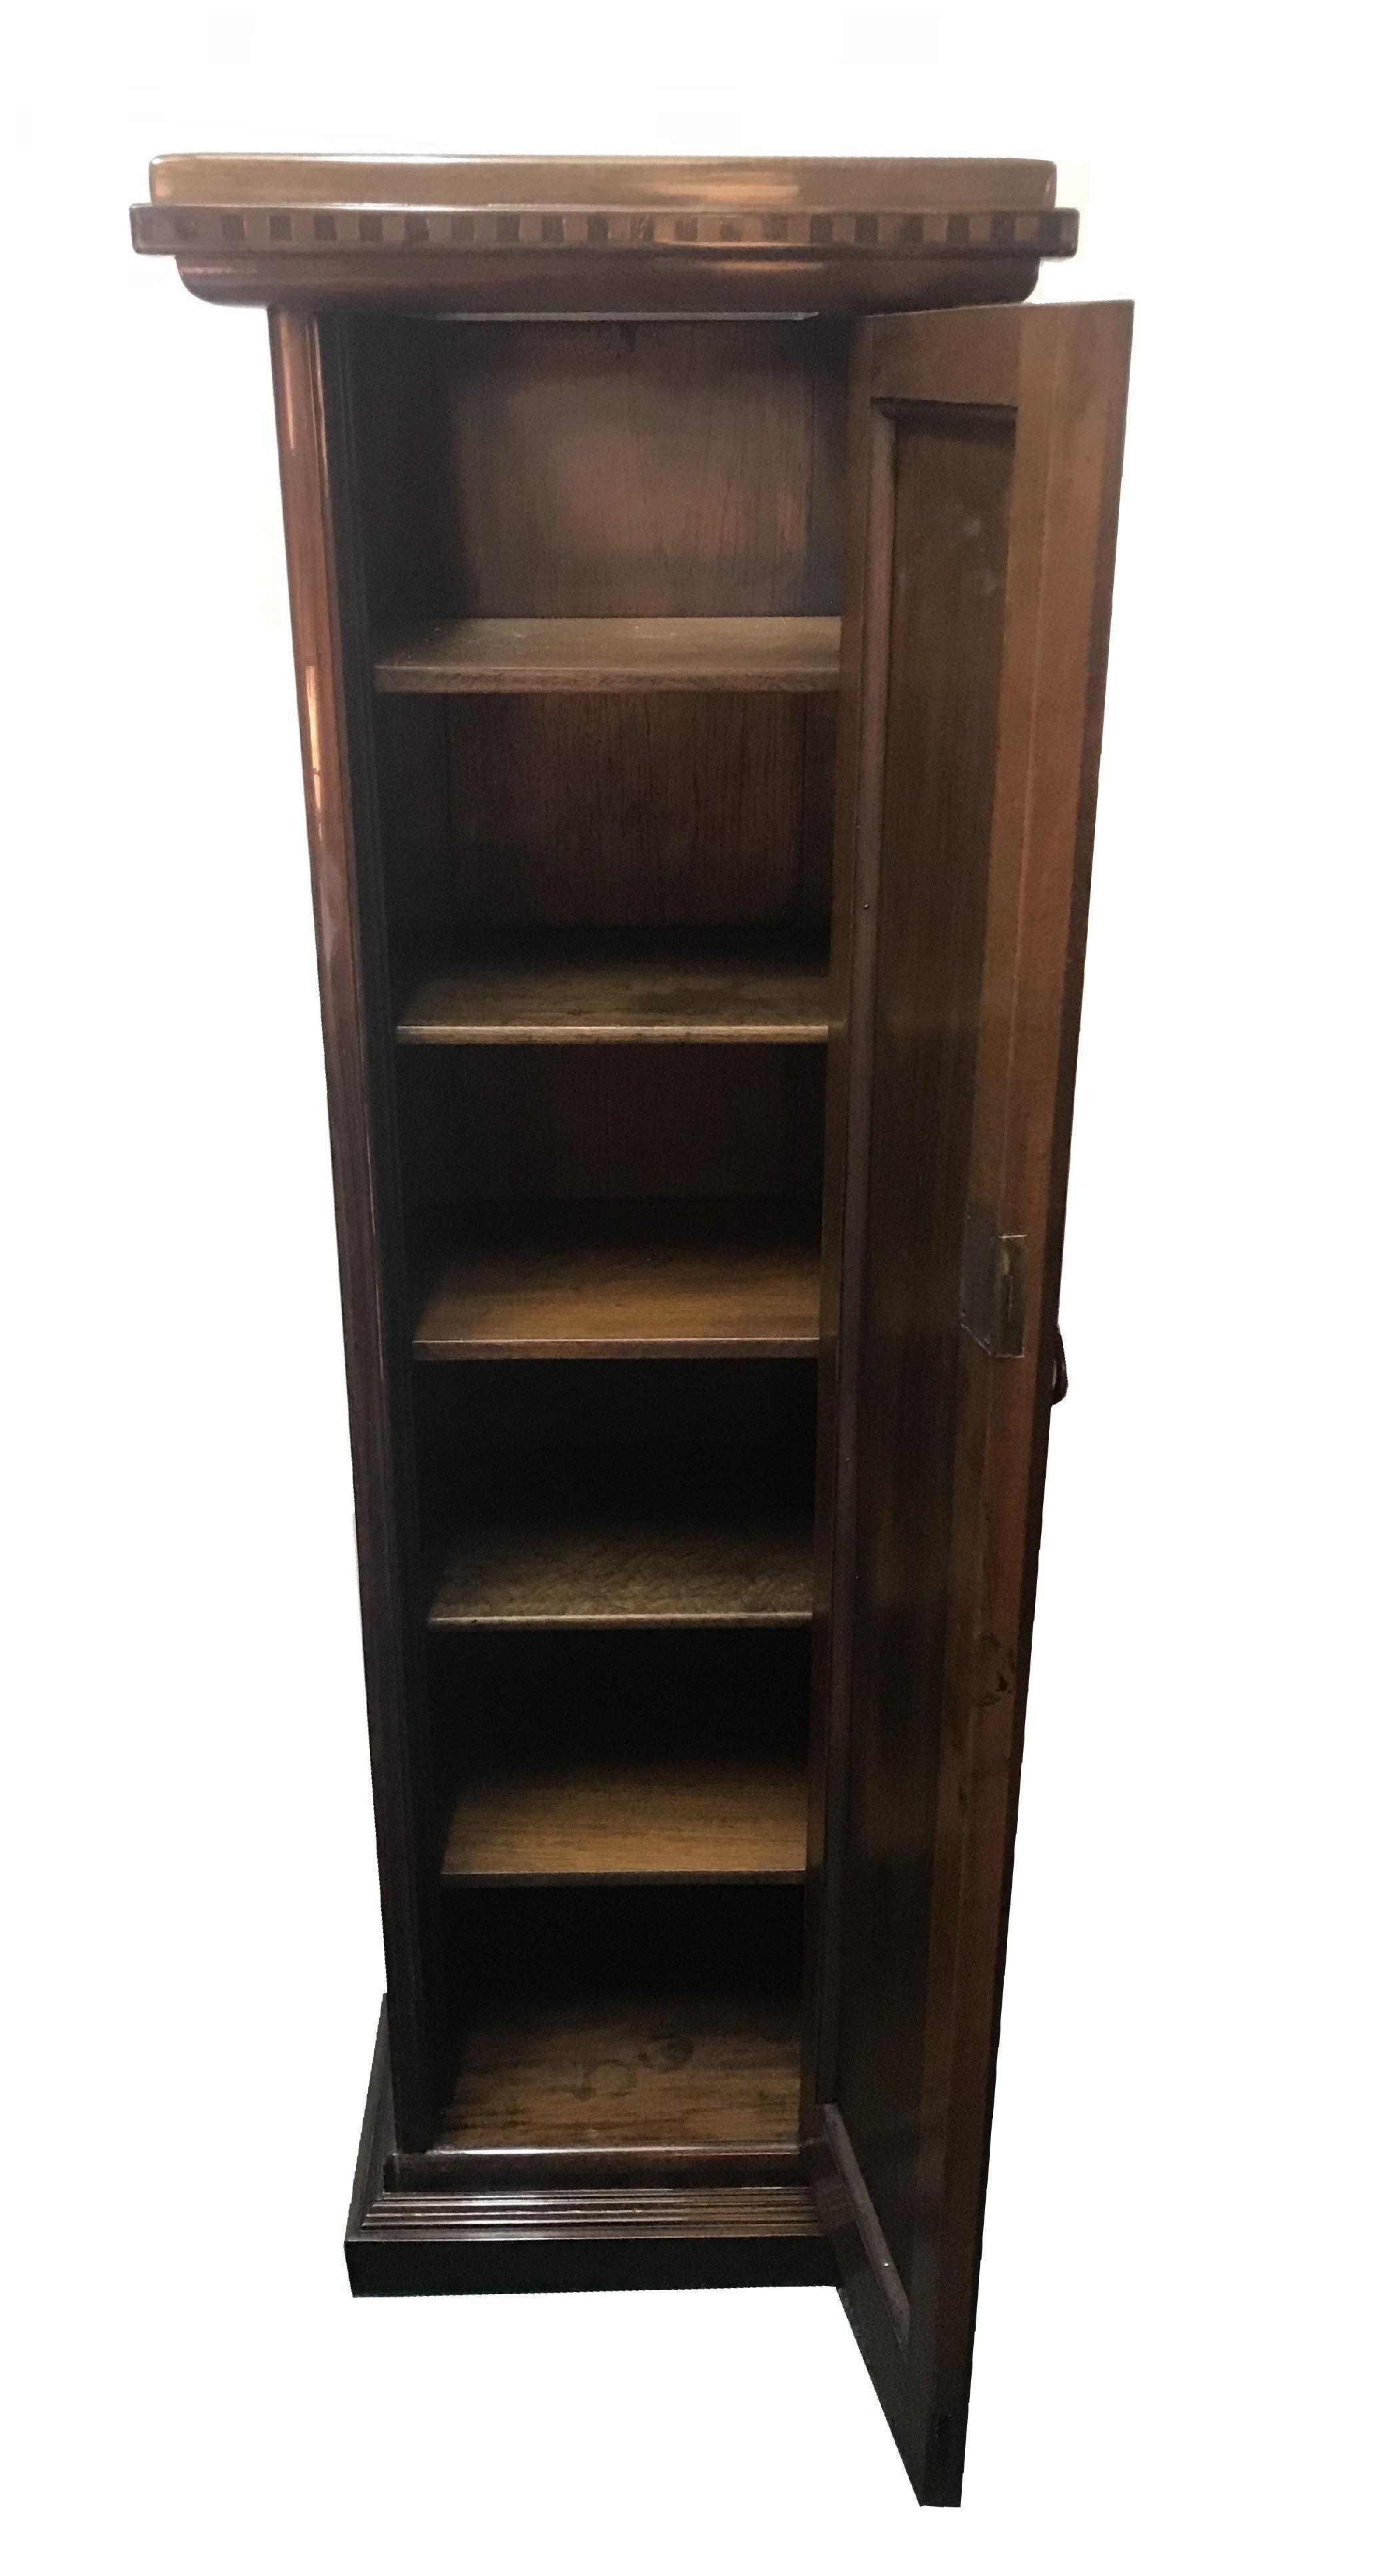 Pair of Art Deco Columns with shelves, 1930, French For Sale 2